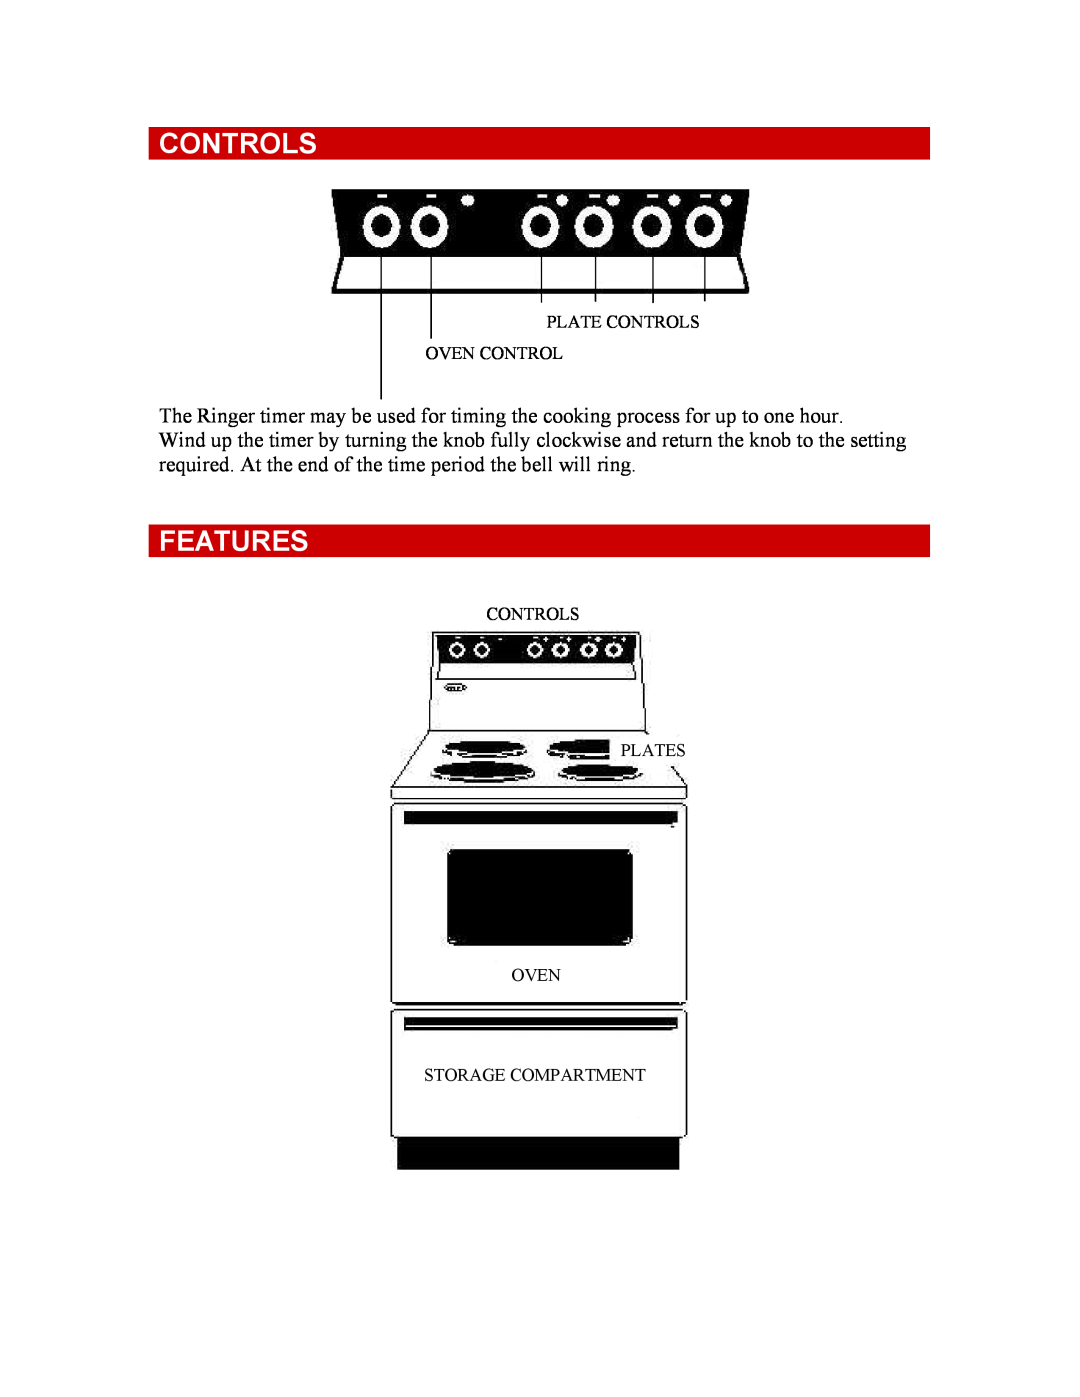 Defy Appliances 521 owner manual Features, Plate Controls Oven Control, Controls Plates Oven Storage Compartment 